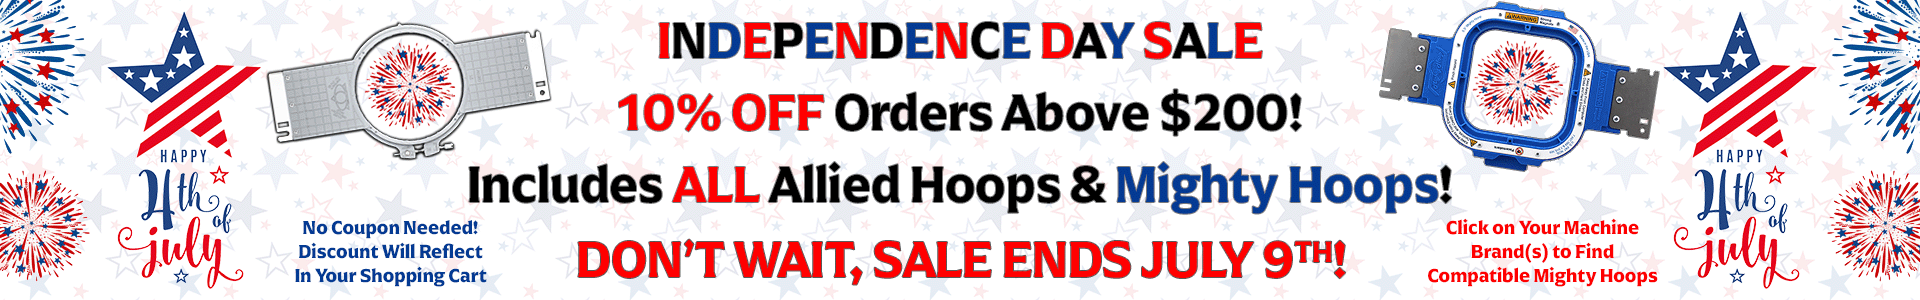 INDEPENDENCE DAY SALE - Take 10% OFF Orders Above $200! Includes ALL Allied Hoops and Mighty Hoops!